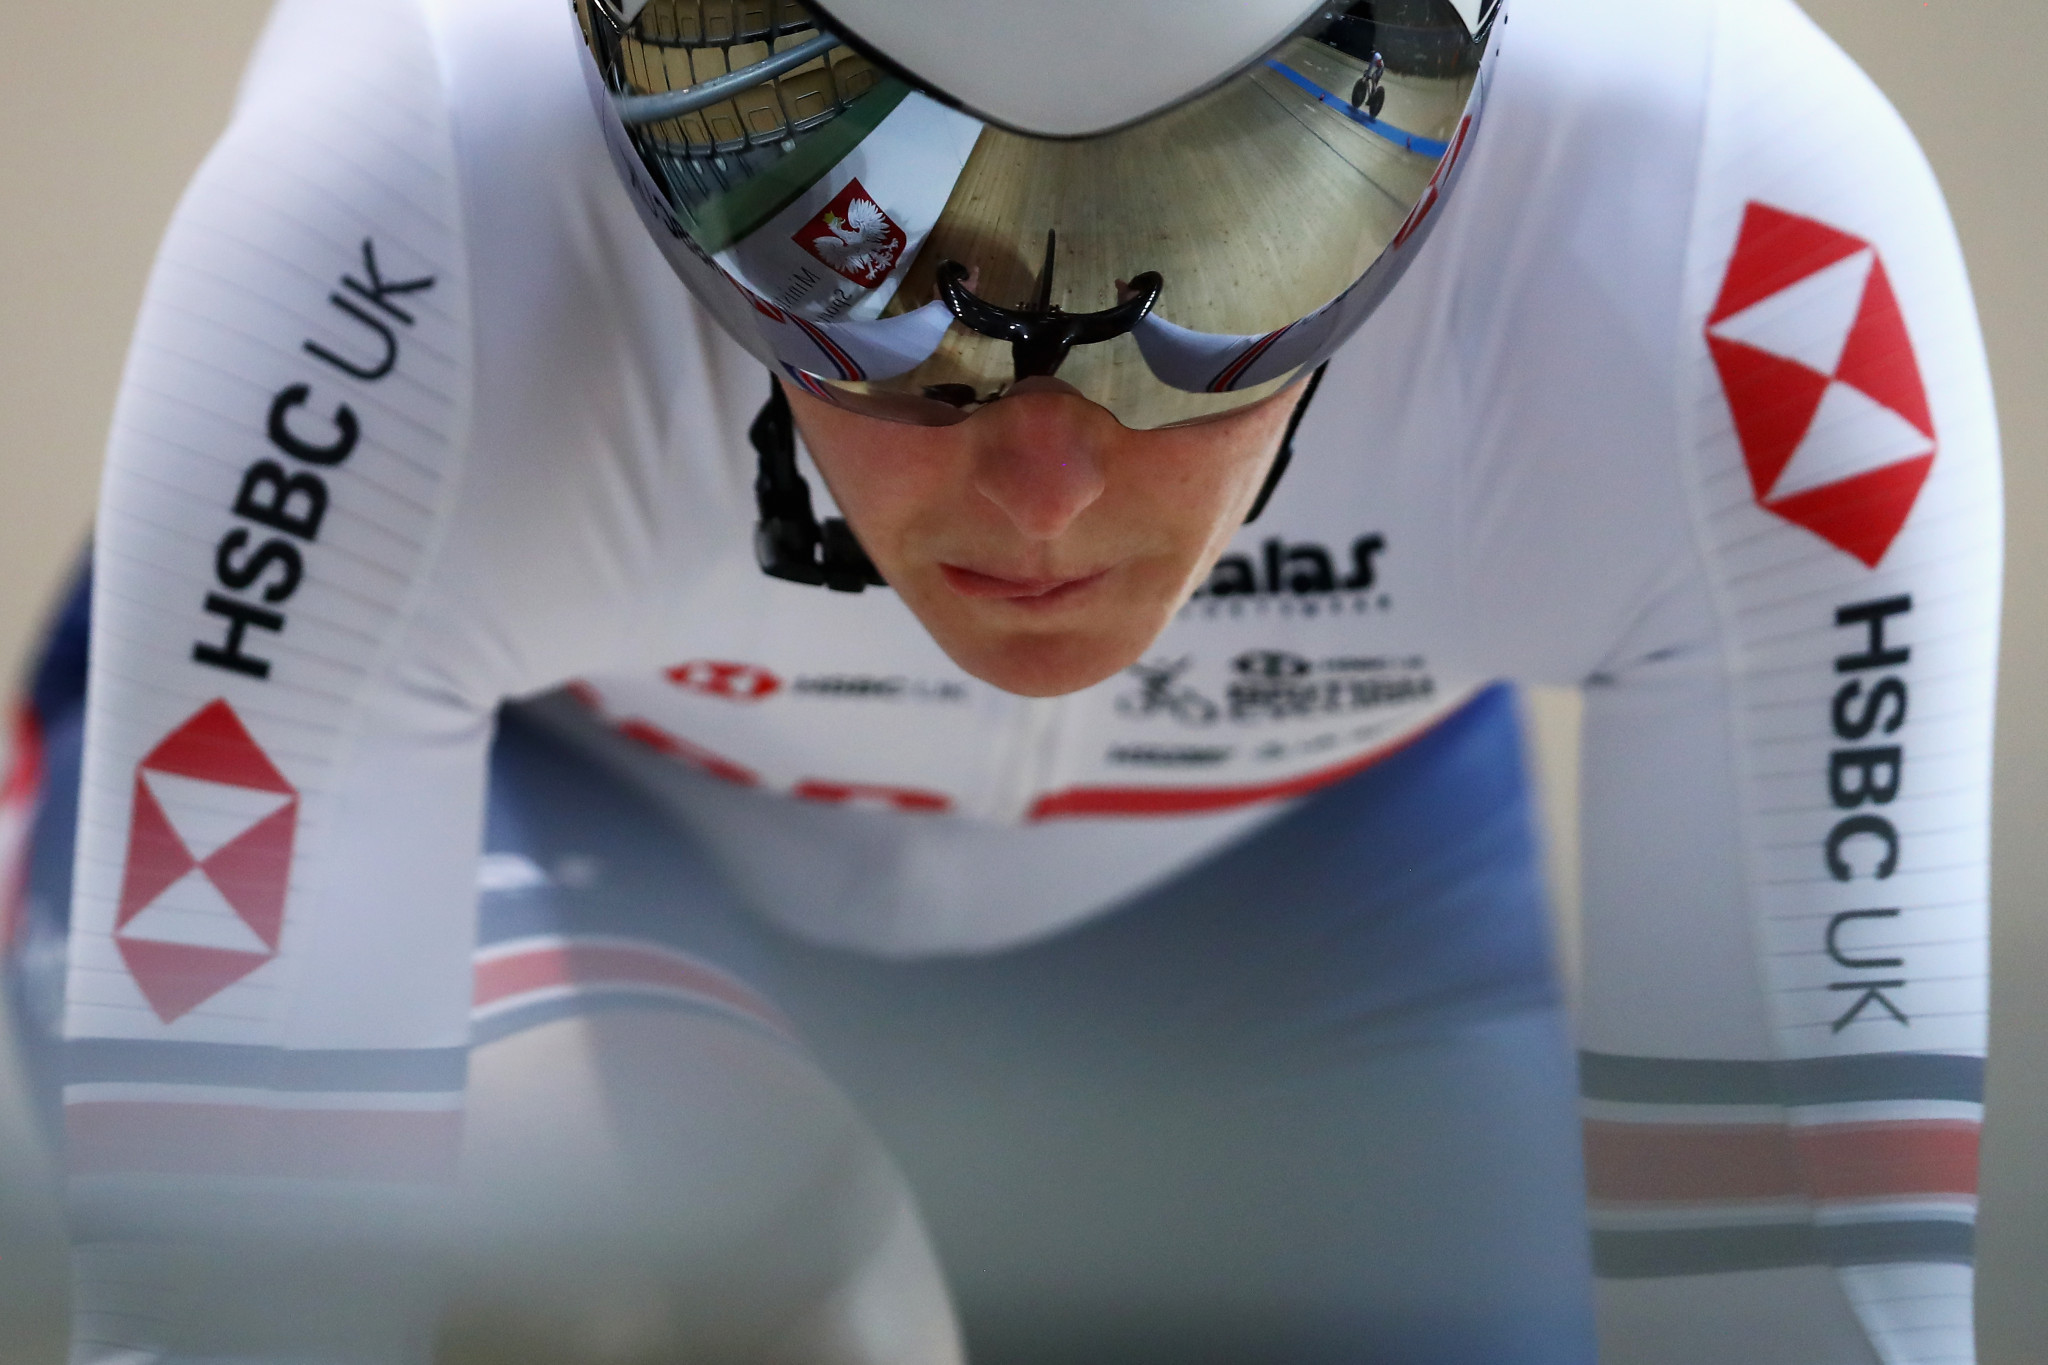 Katy Marchant won the women's keirin title by a narrow margin ©Getty Images